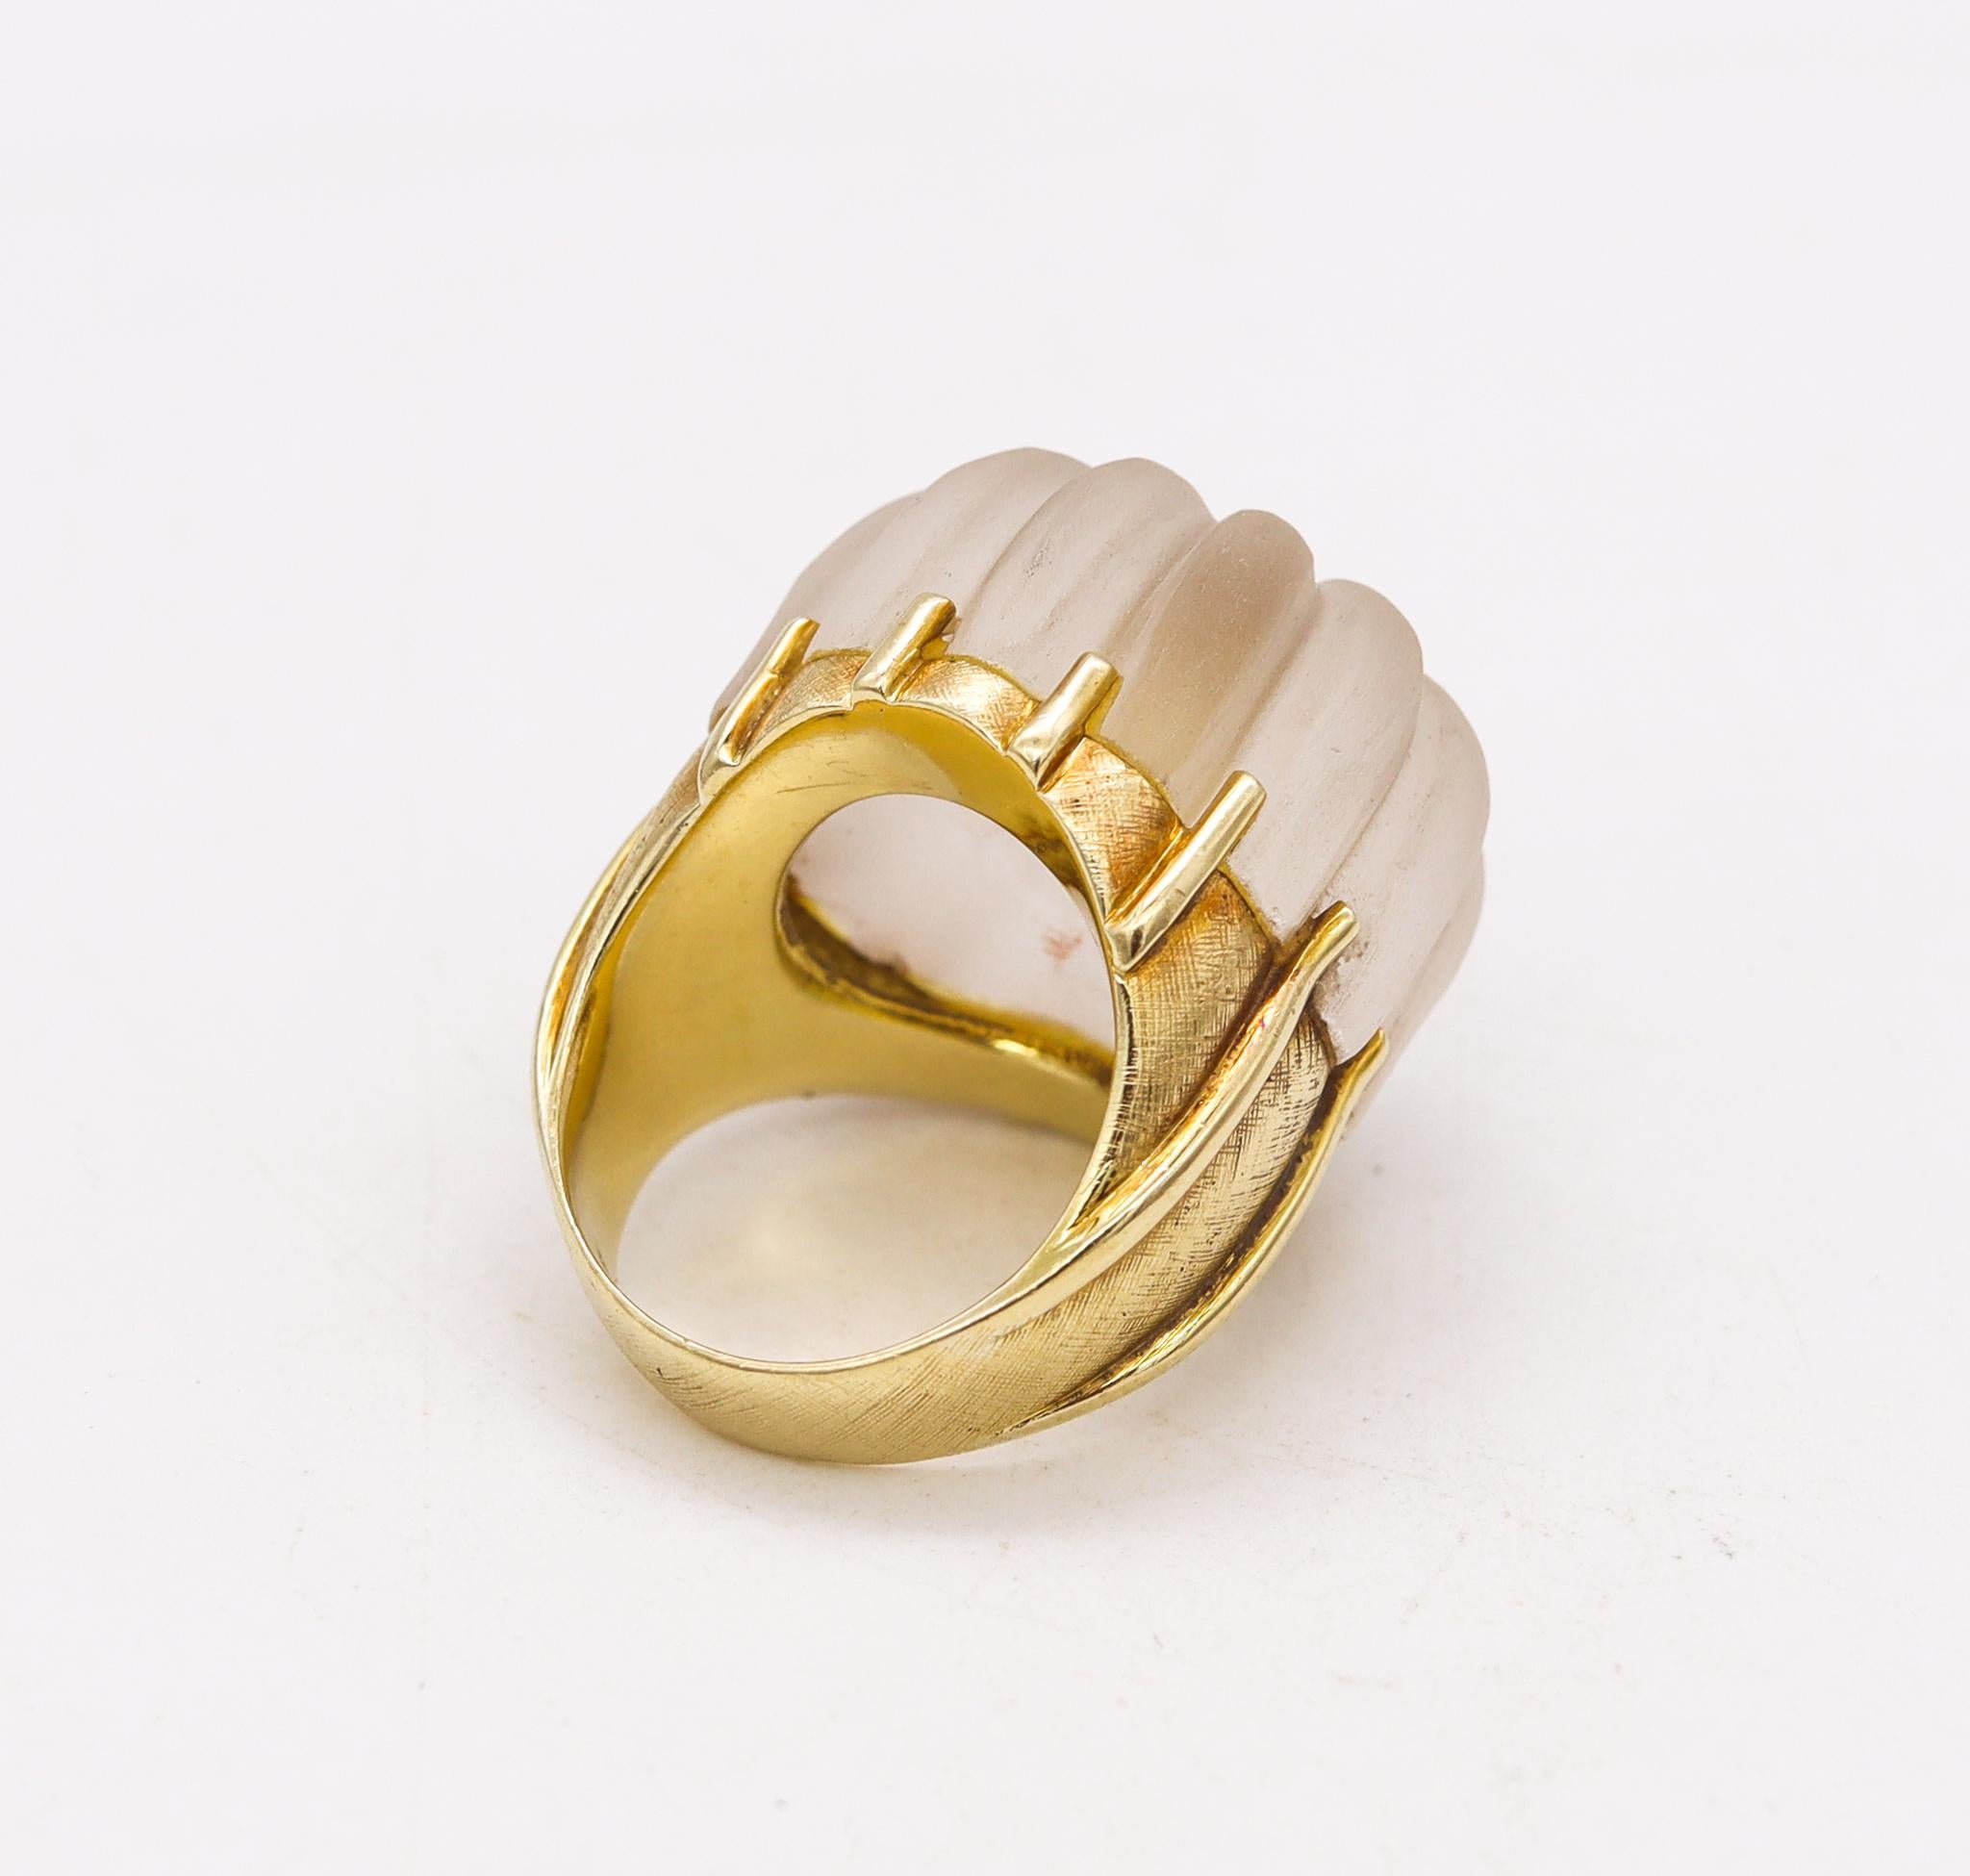 Modernism 1970 Cocktail Ring in 18Kt Yellow Gold with Rock Quartz & VS Diamonds In Excellent Condition For Sale In Miami, FL